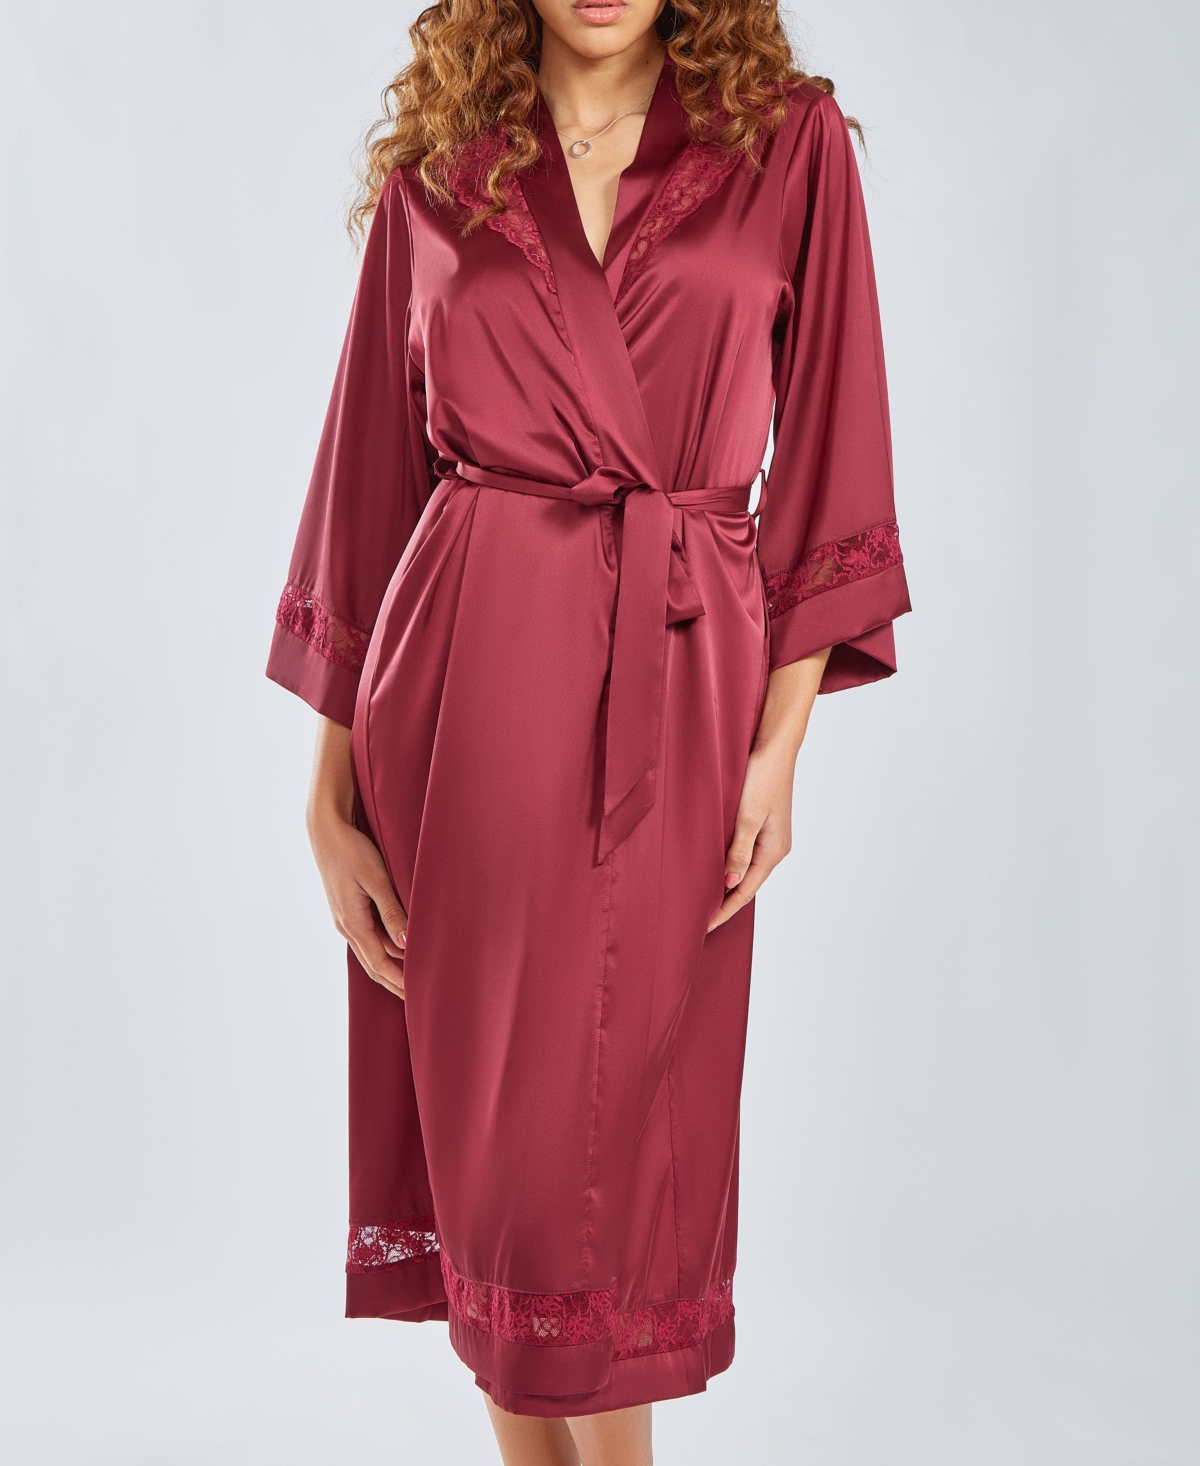 Women's Silky Long Robe with Lace Trims - Wine